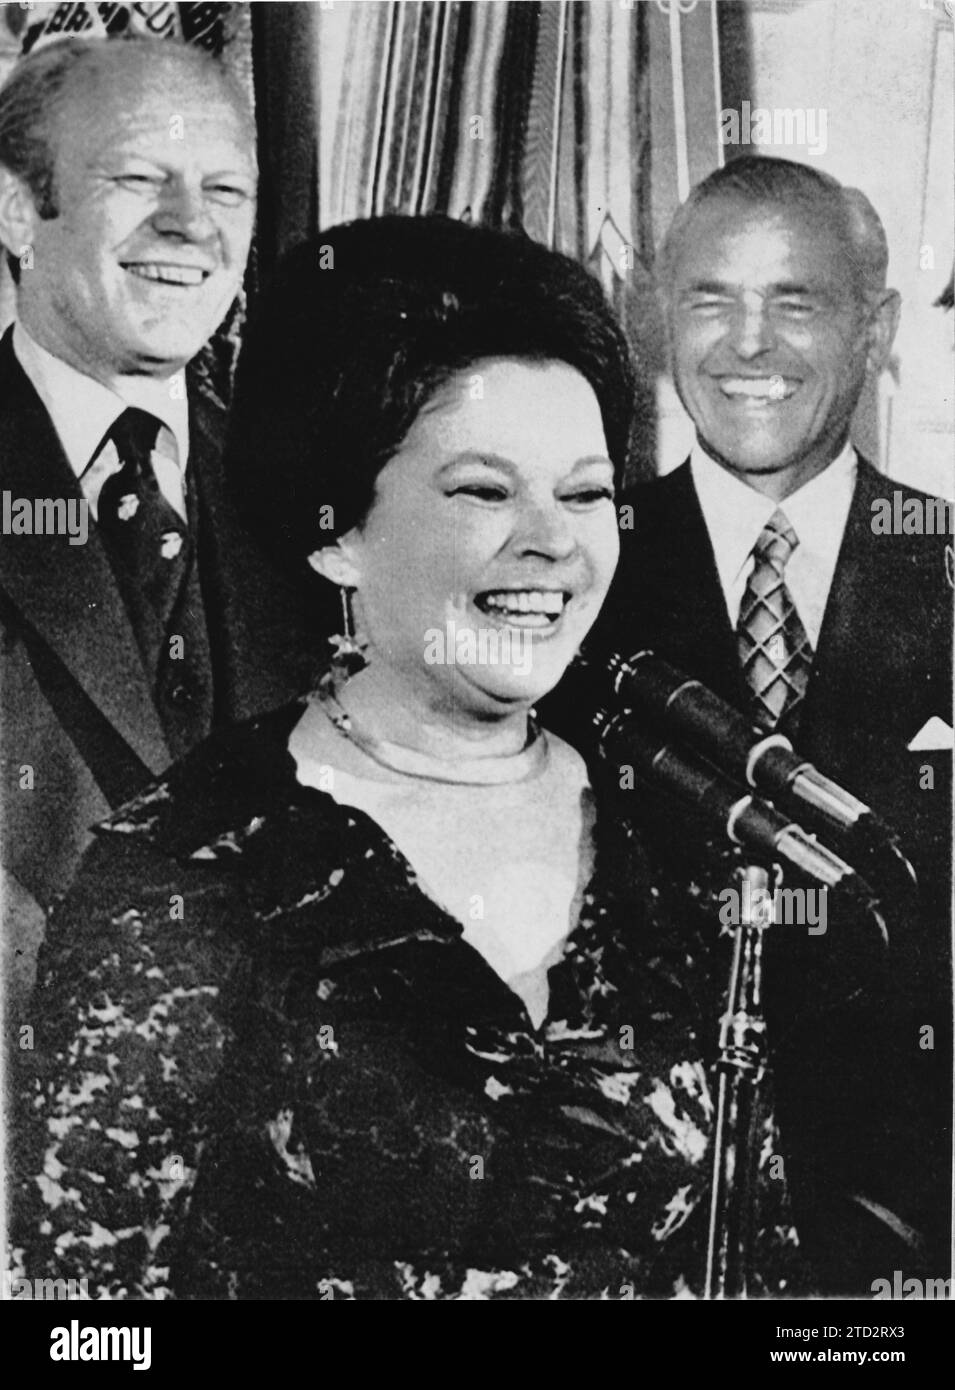 07/20/1976. Shirley Temple during the ceremony in which she took up her new position as Chief of Protocol of the White House. Mrs Temple Black was ambassador to Ghana. Behind her are President Ford (left) and Shirley's husband, Charles Black. Credit: Album / Archivo ABC Stock Photo